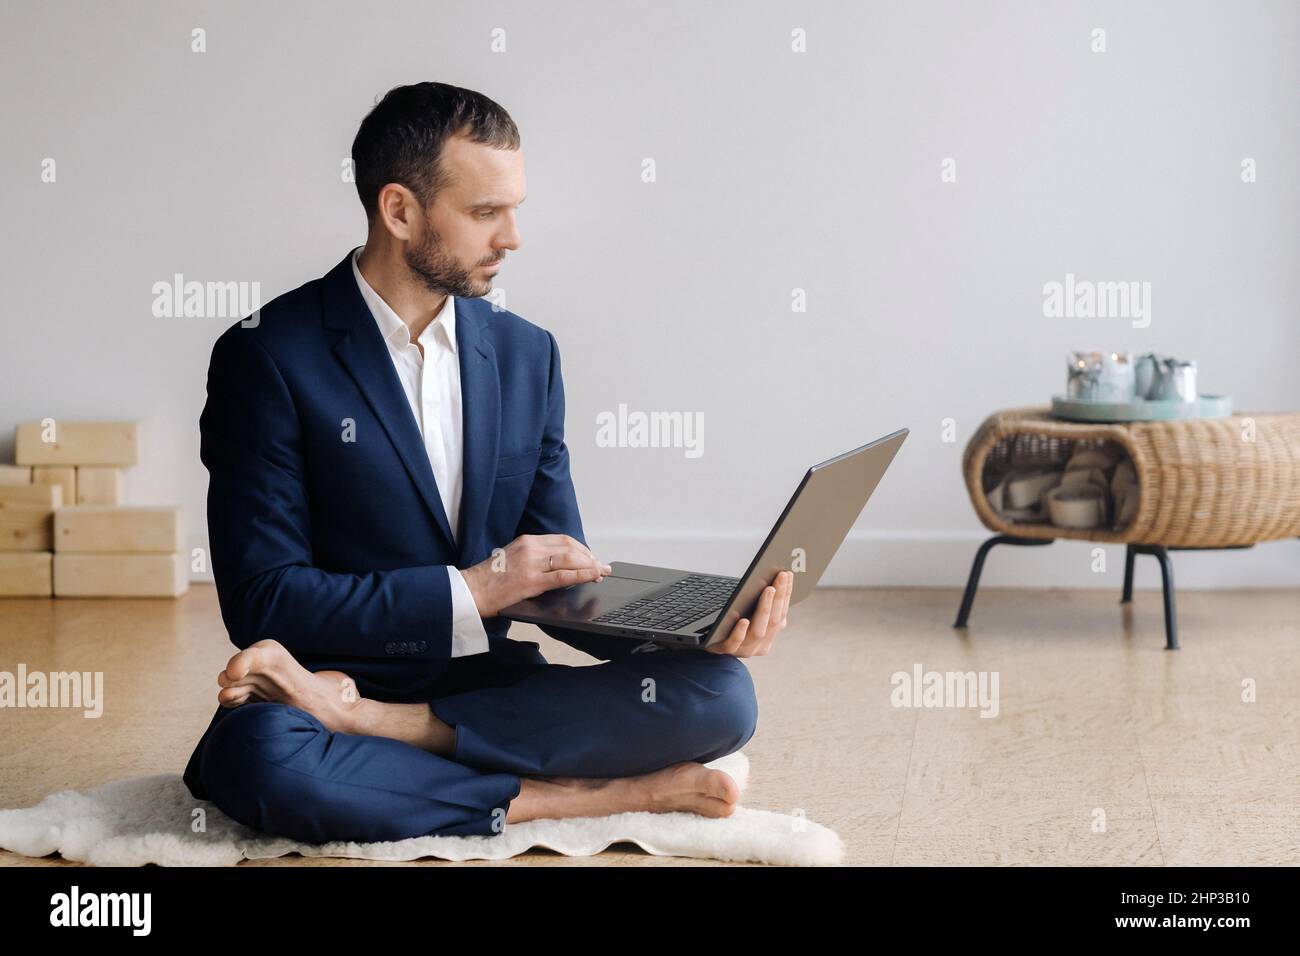 A man in a formal suit works sitting in a fitness room on a laptop Stock Photo